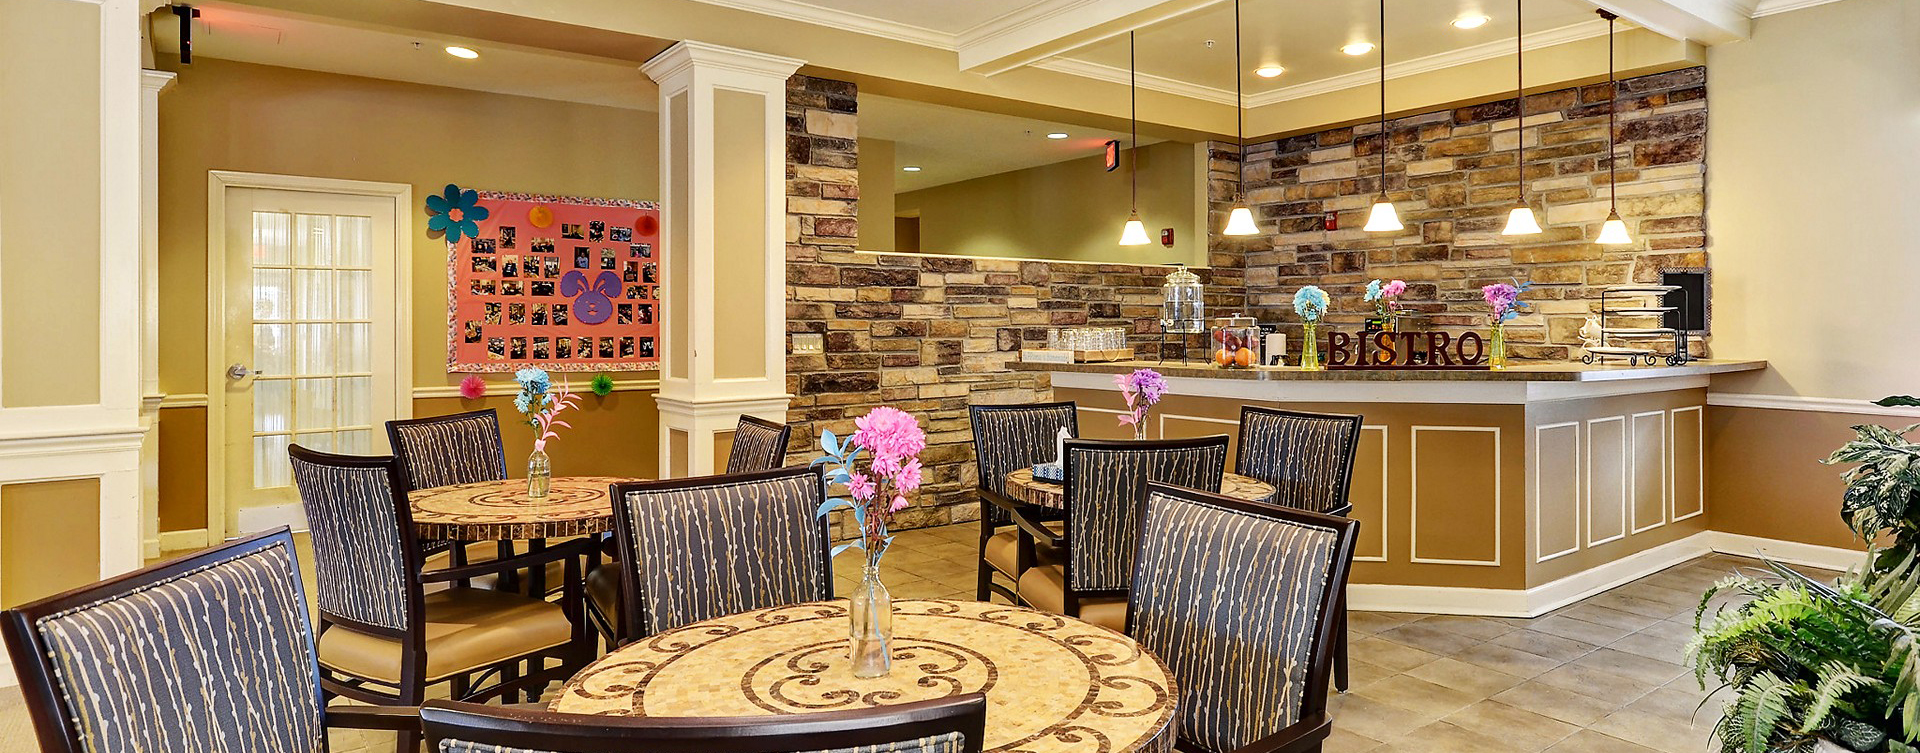 Mingle and converse with old and new friends alike in the bistro at Bickford of Crystal Lake